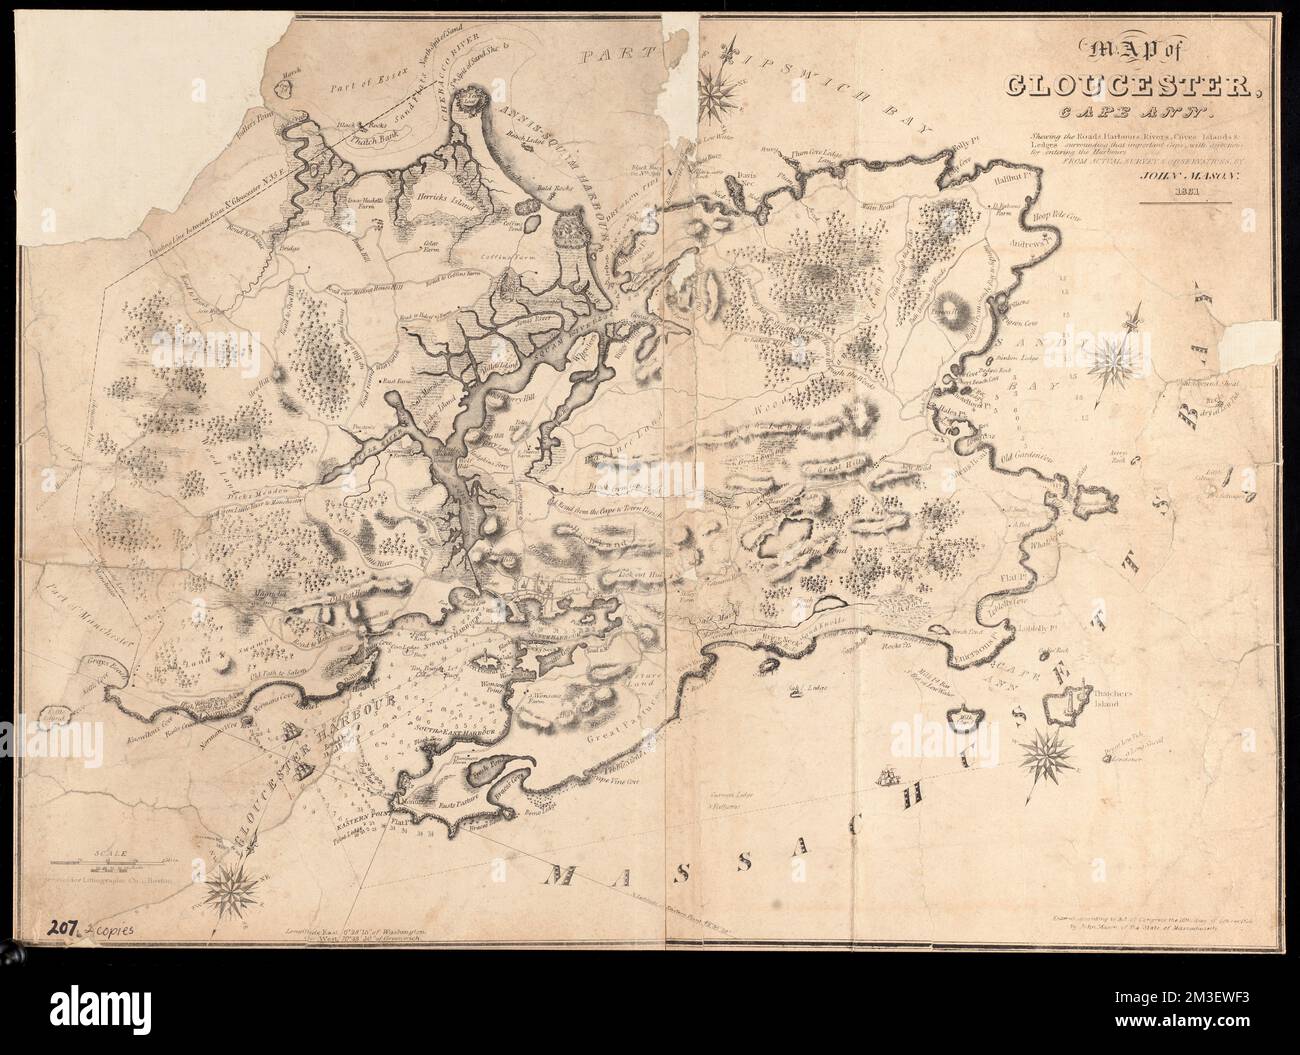 Map of Gloucester, Cape Ann : Showing the roads, harbours, rivers, coves, islands & ledges, surrounding that important cape, with directions for entering the harbours , Stock Photo